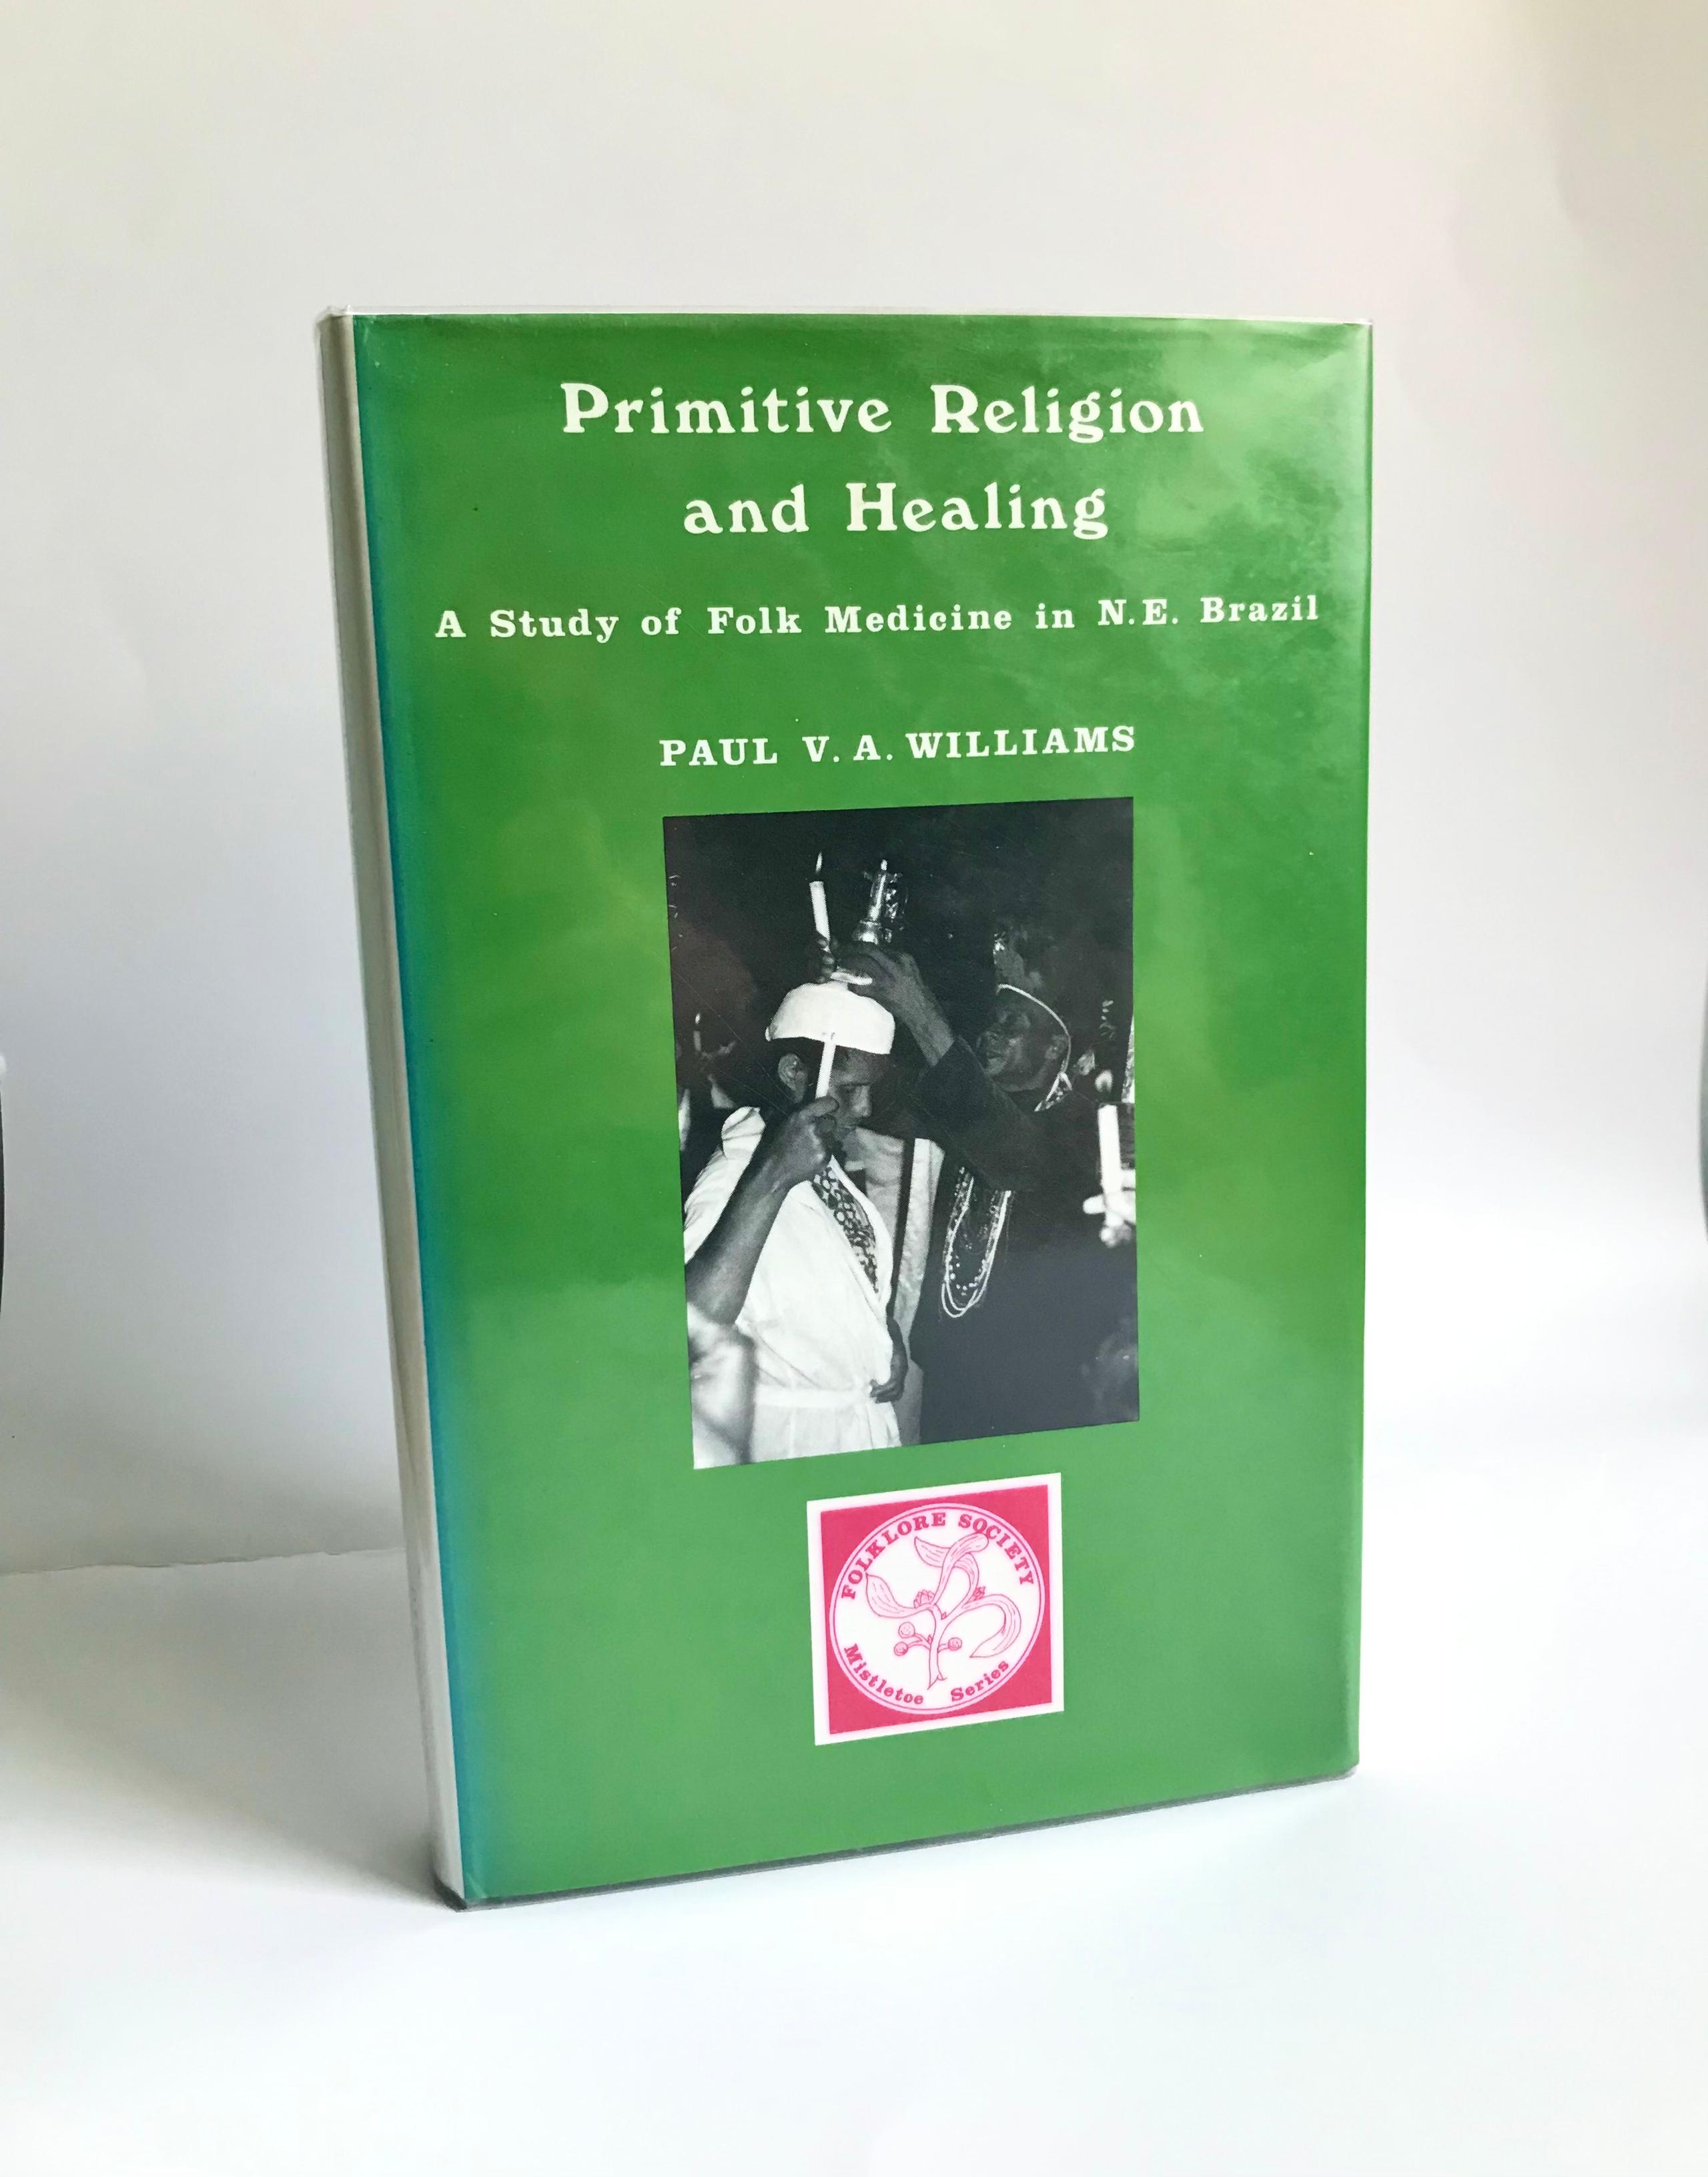 Primitive Religion and Healing: A Study of Folk Medicine in N. E. Brazil by Paul Williams